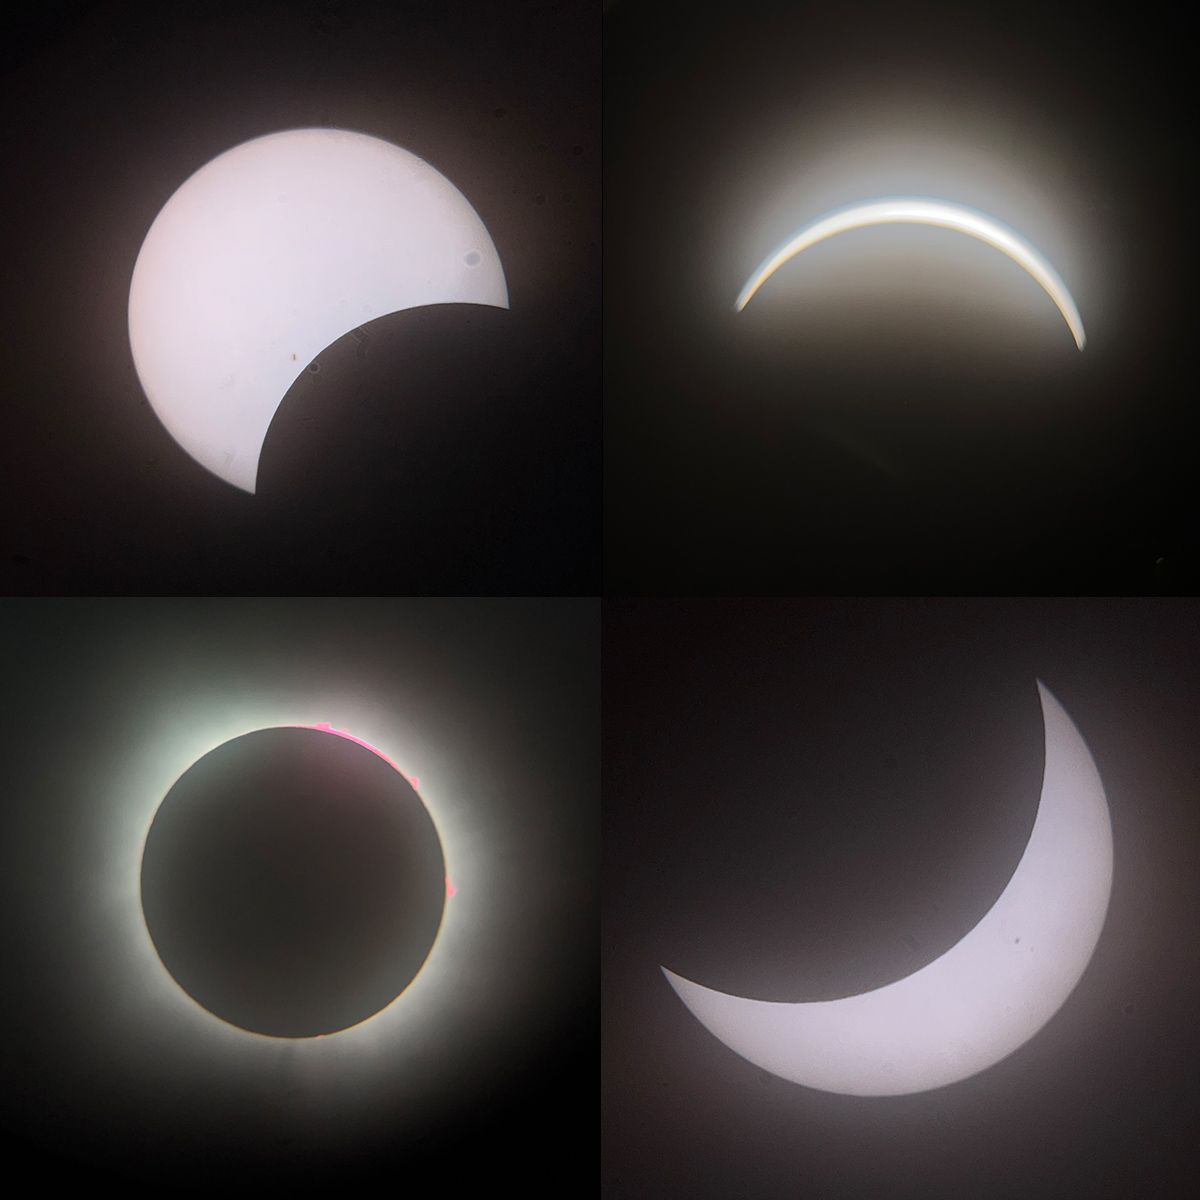 Rising third-year medical student Chad Huss shared some of his photos from the total solar eclipse on April 8. He snapped the photos using an iPhone 13 and his 10-inch Dobsonian telescope. 
#UToledoMed #totalsolareclipse